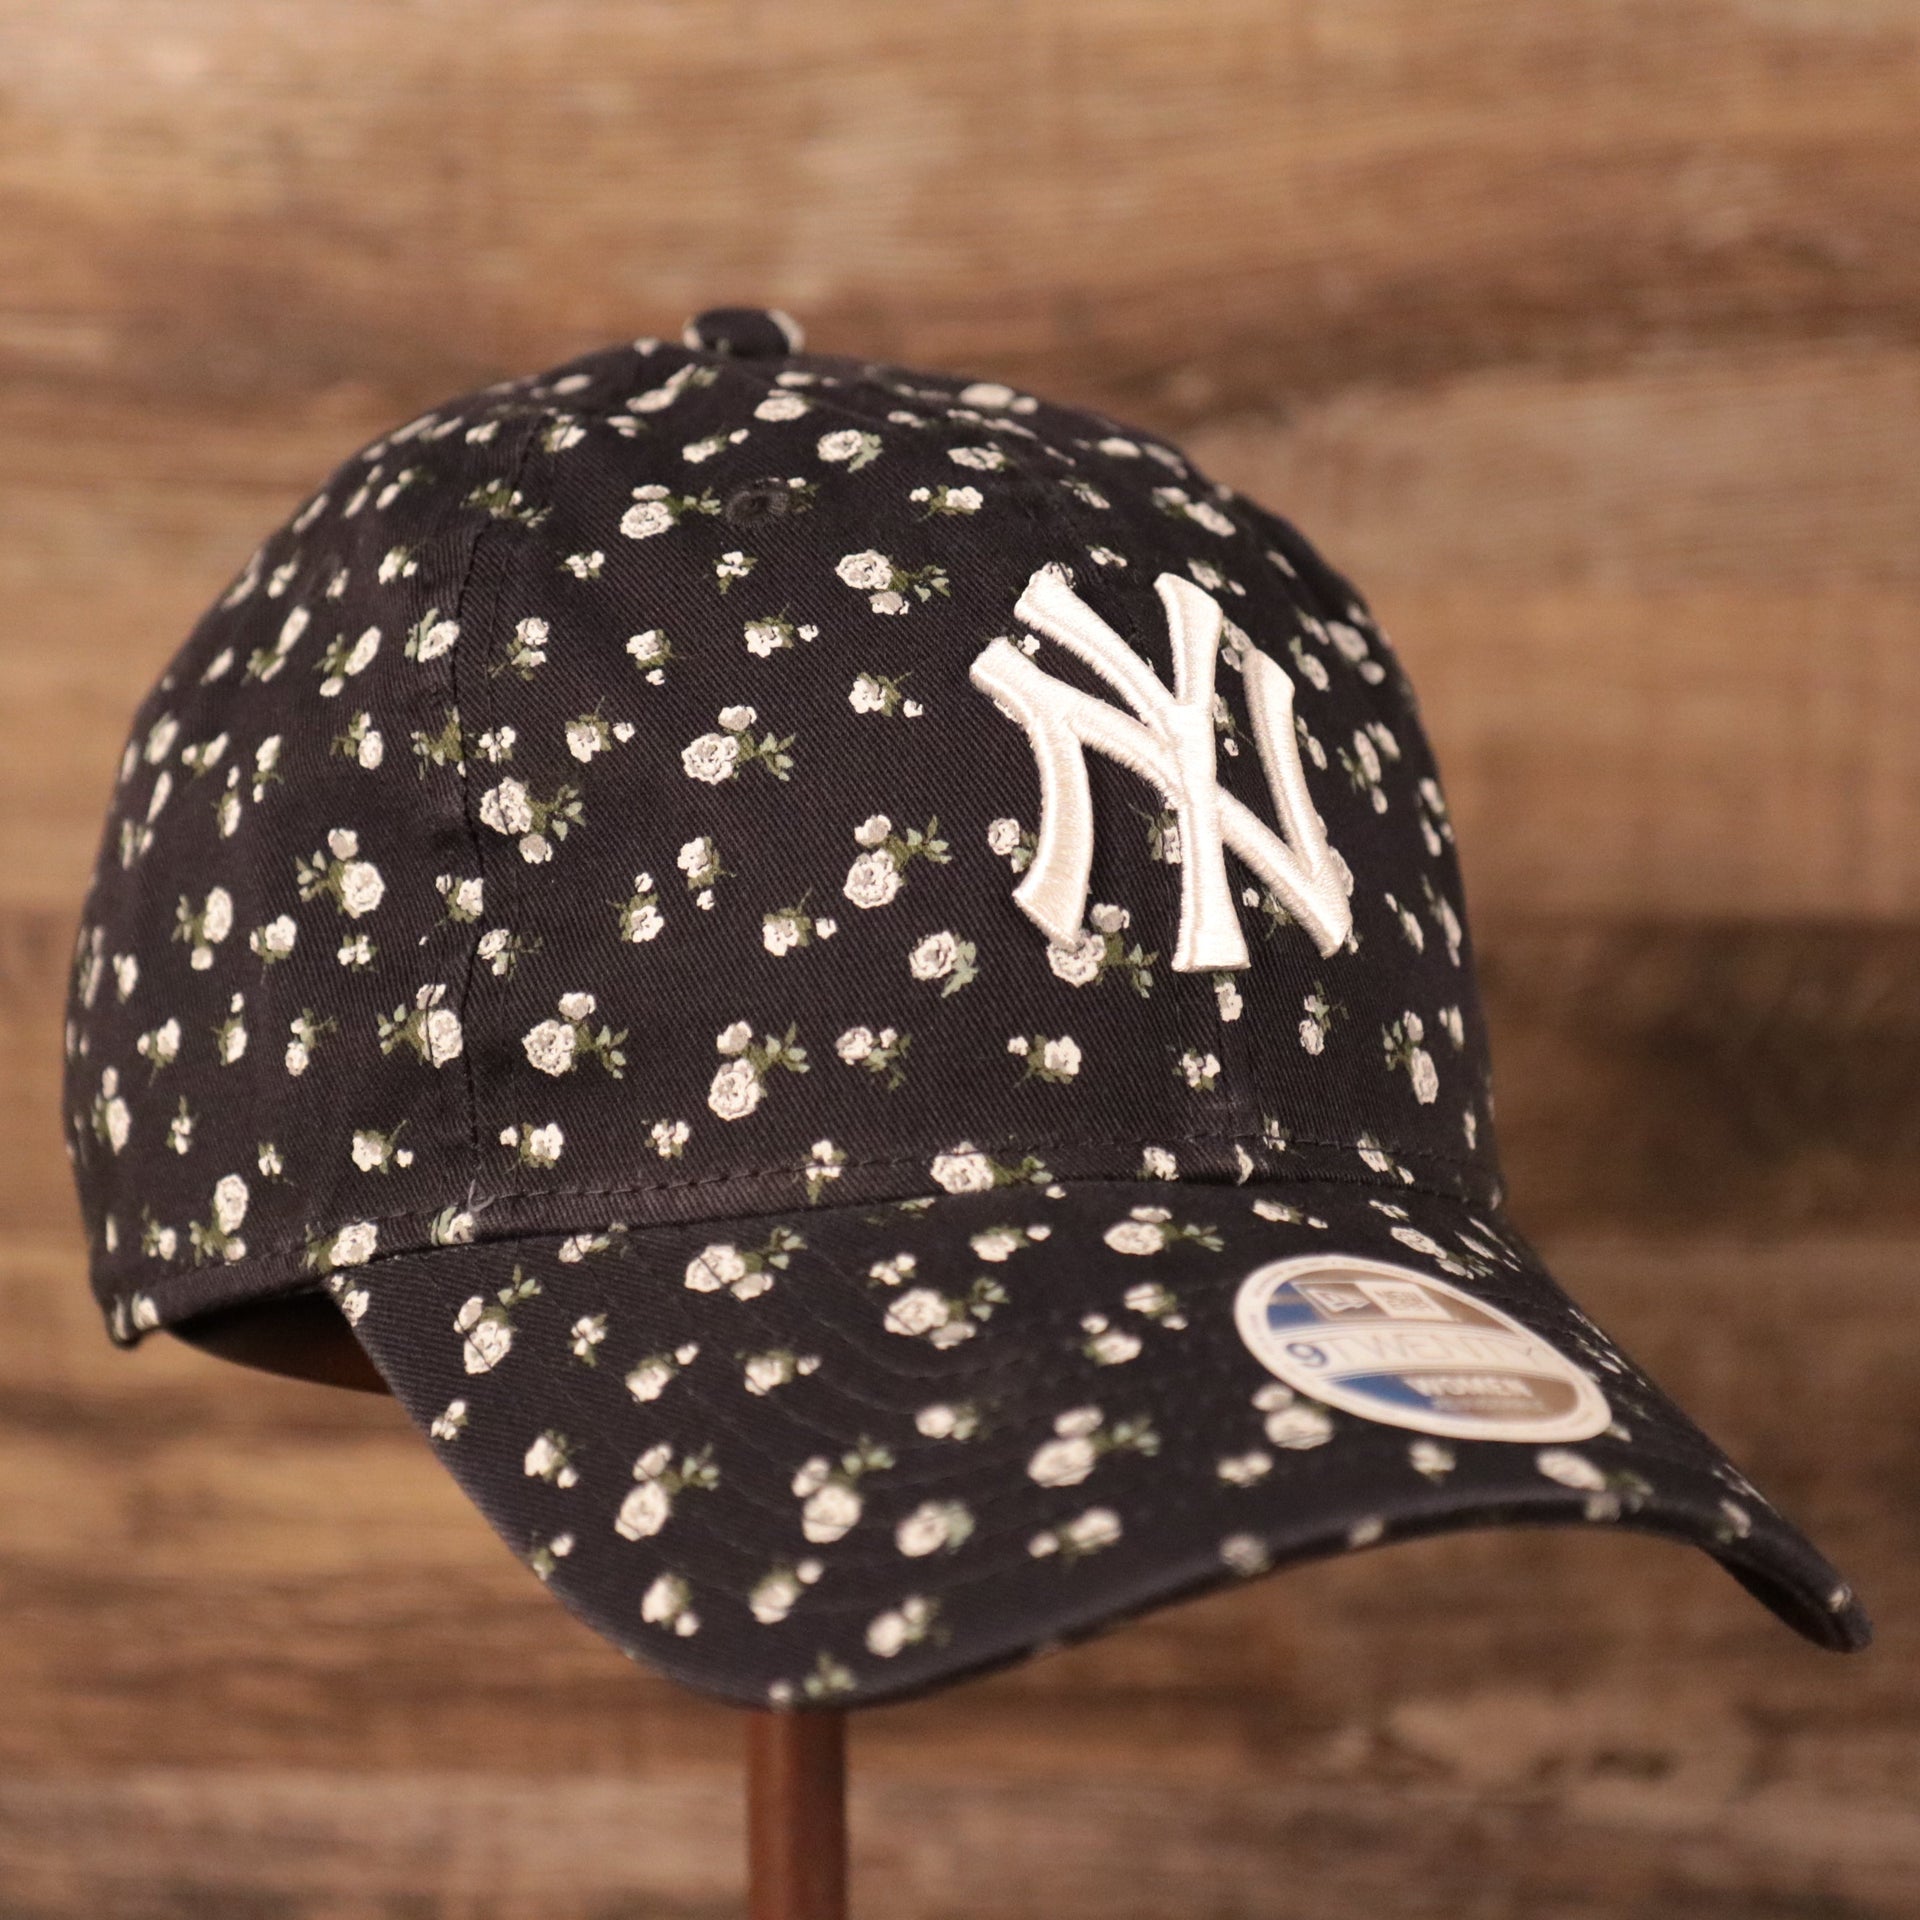 The New York Yankees navy blue floral baseball 920 dad hat.